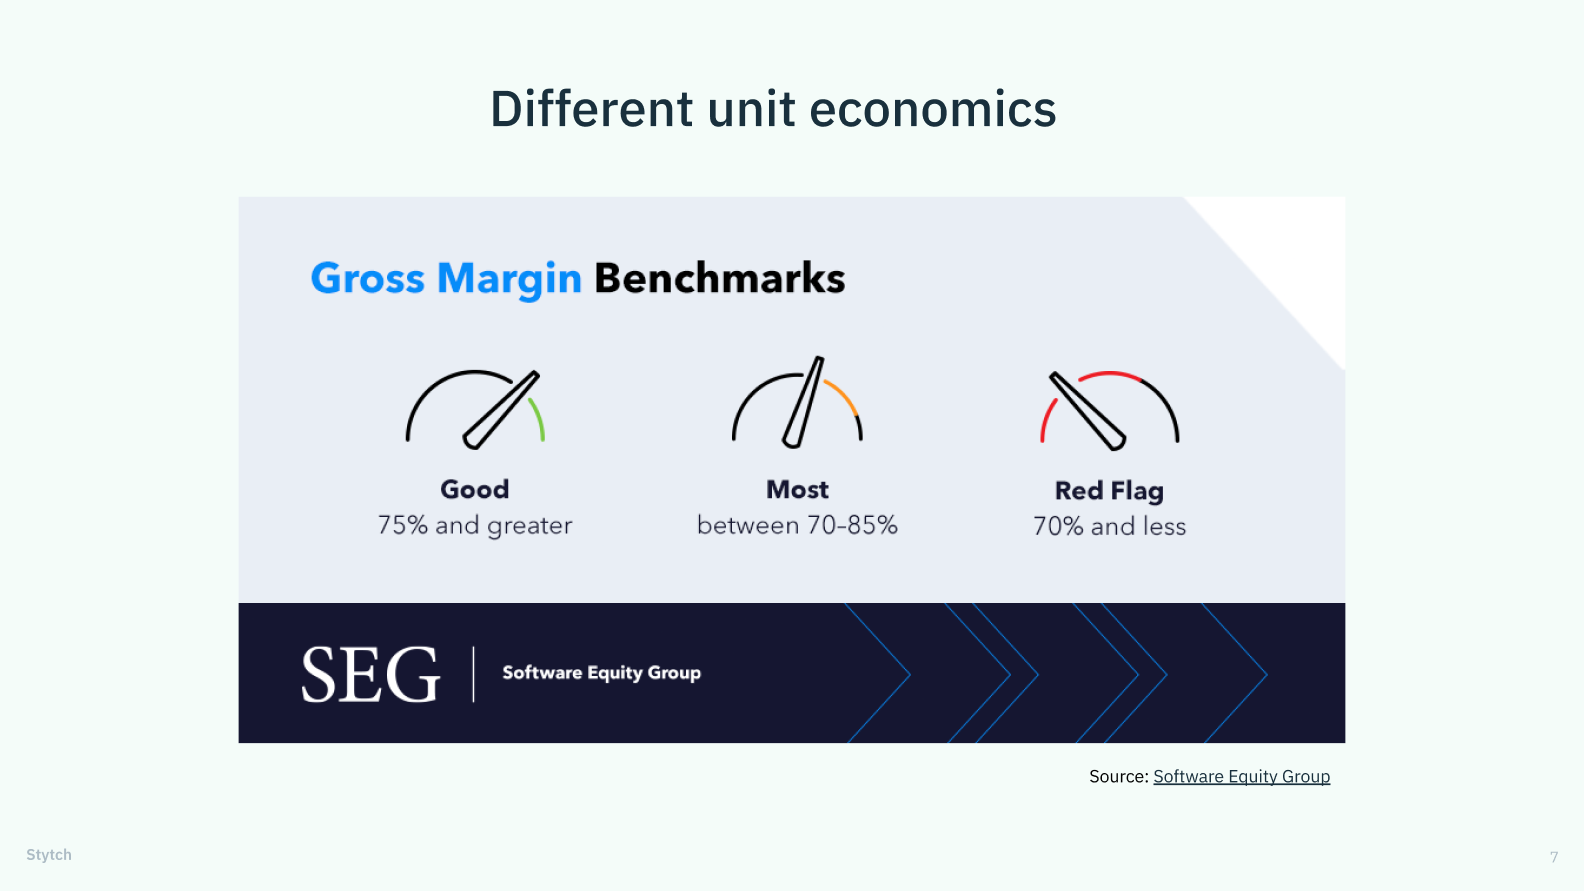 Title: Different Unit Economics. Image shows three odometers that represent different gross margin benchmarks: > 75% = Good, 70-85% = Most companies, < 75% = Red flag